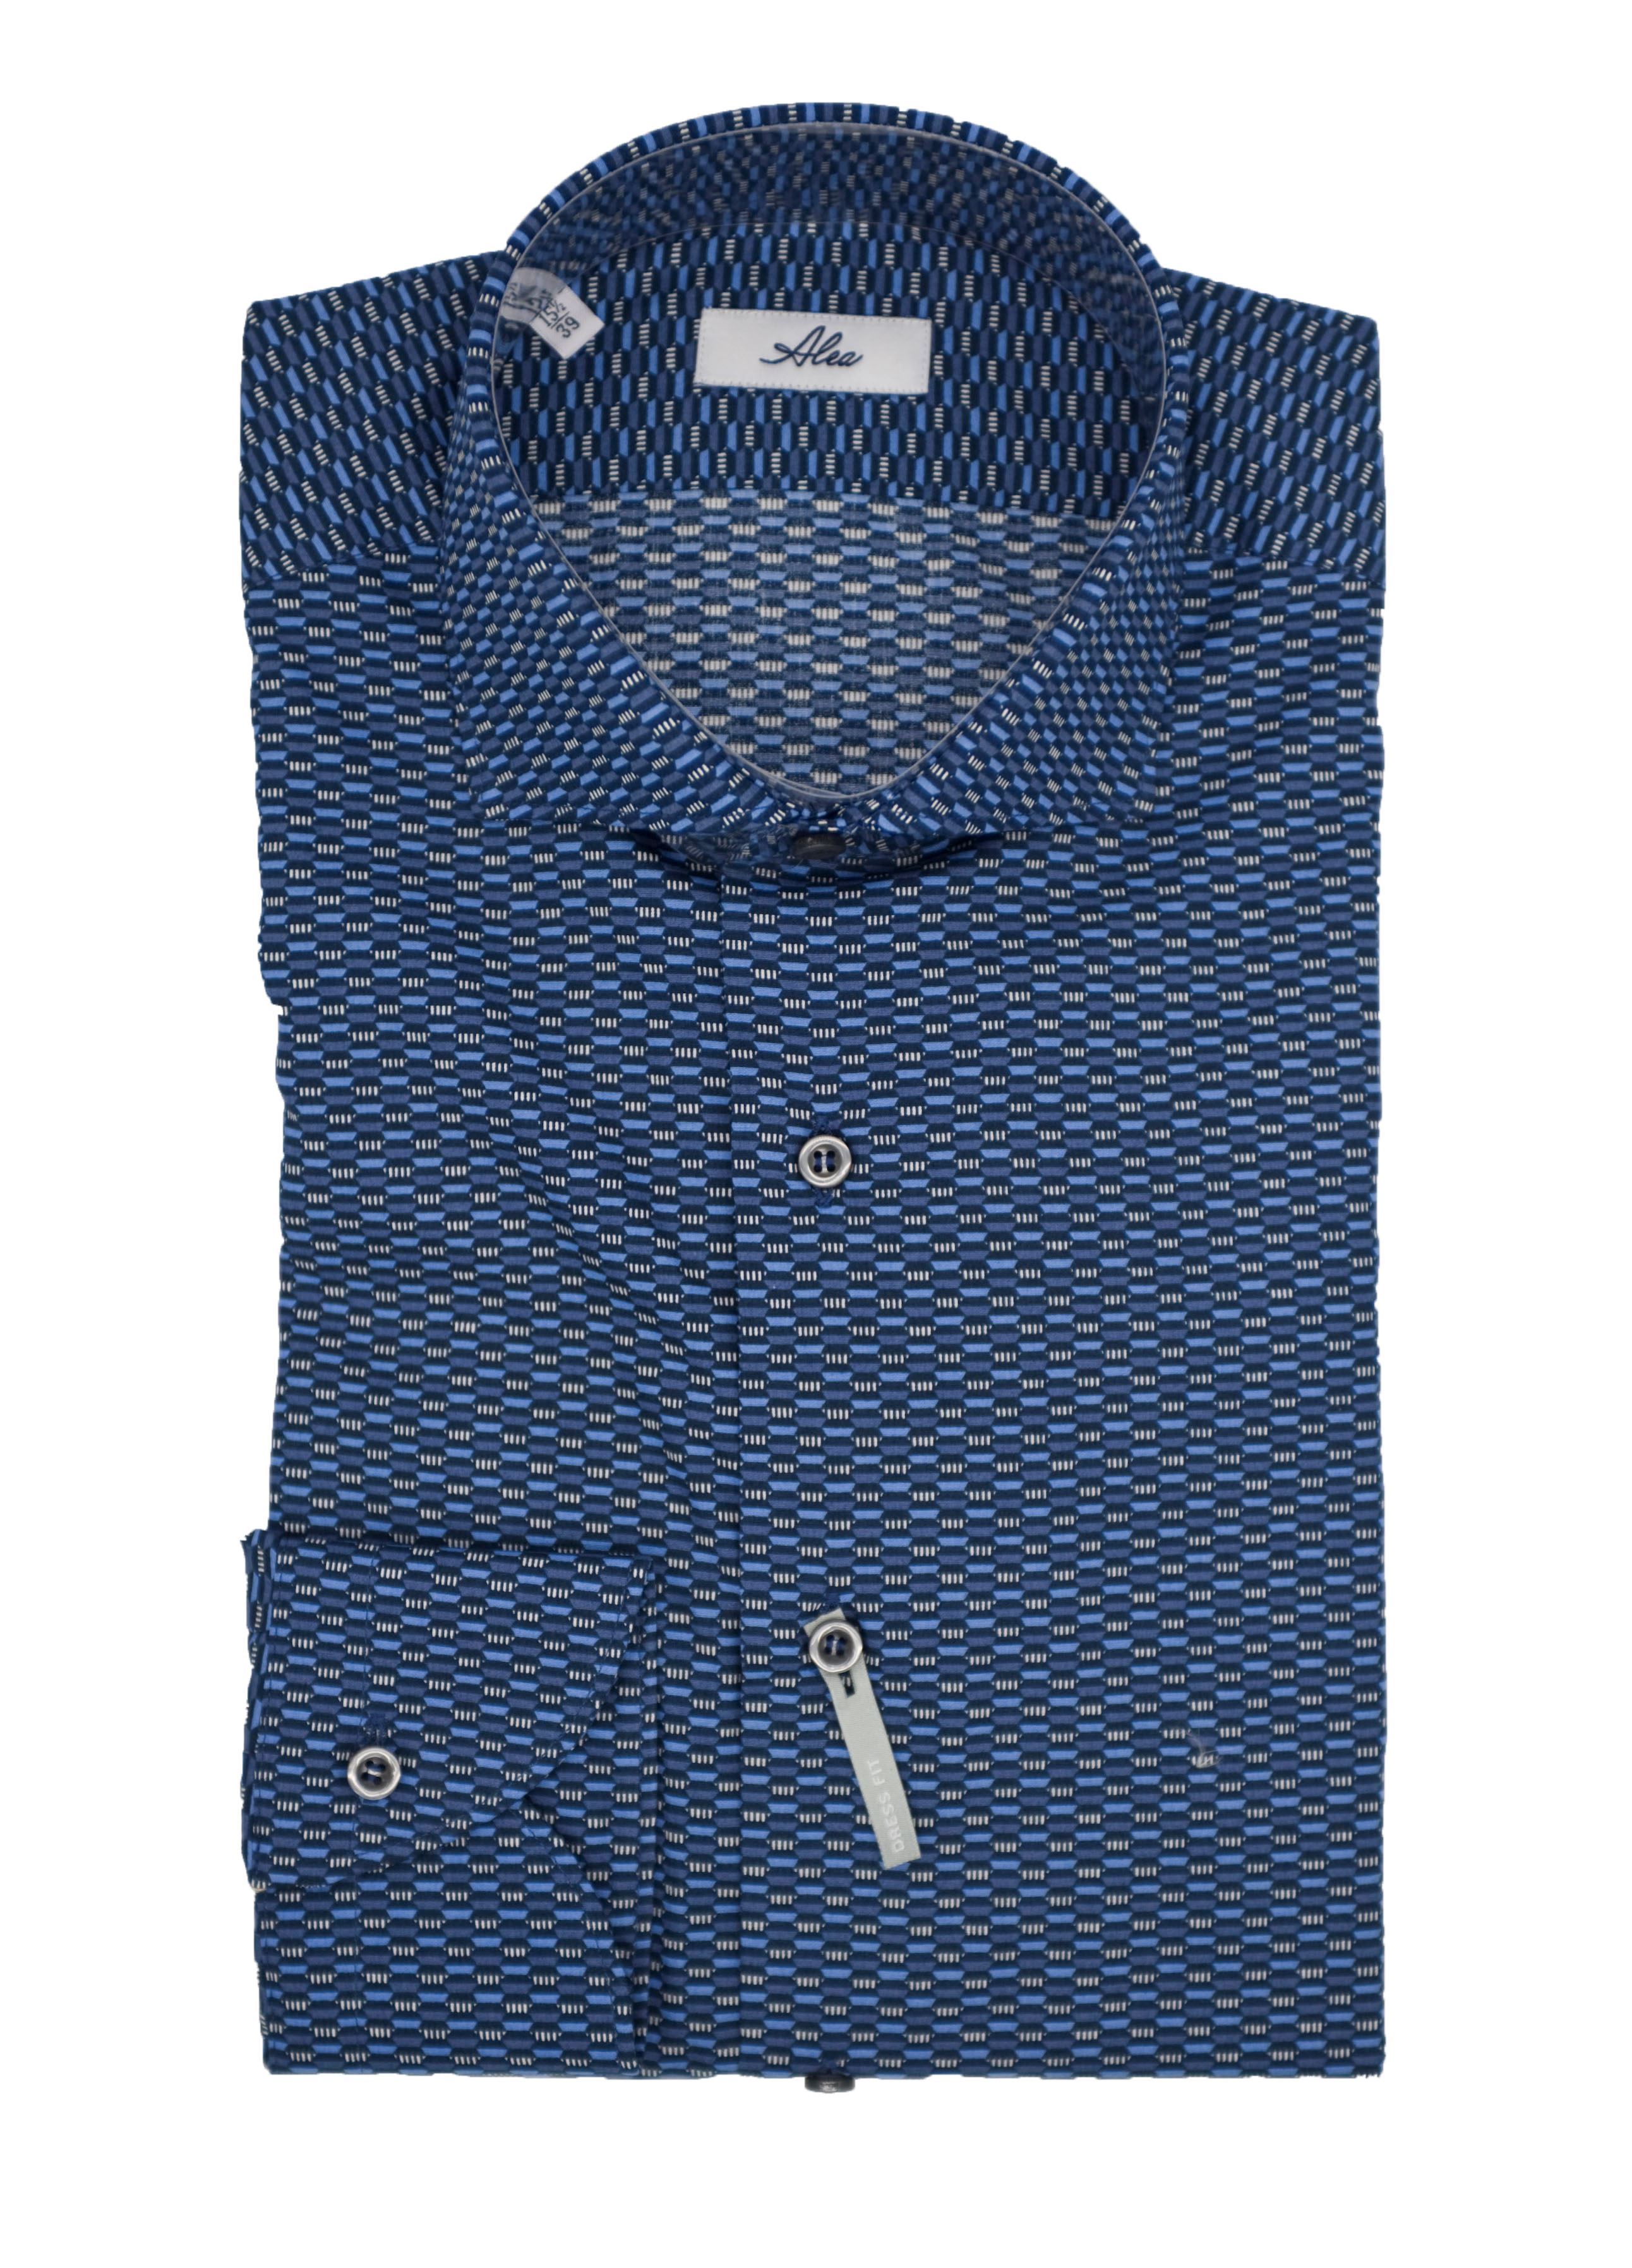 Picture of Patterned shirt with blue background